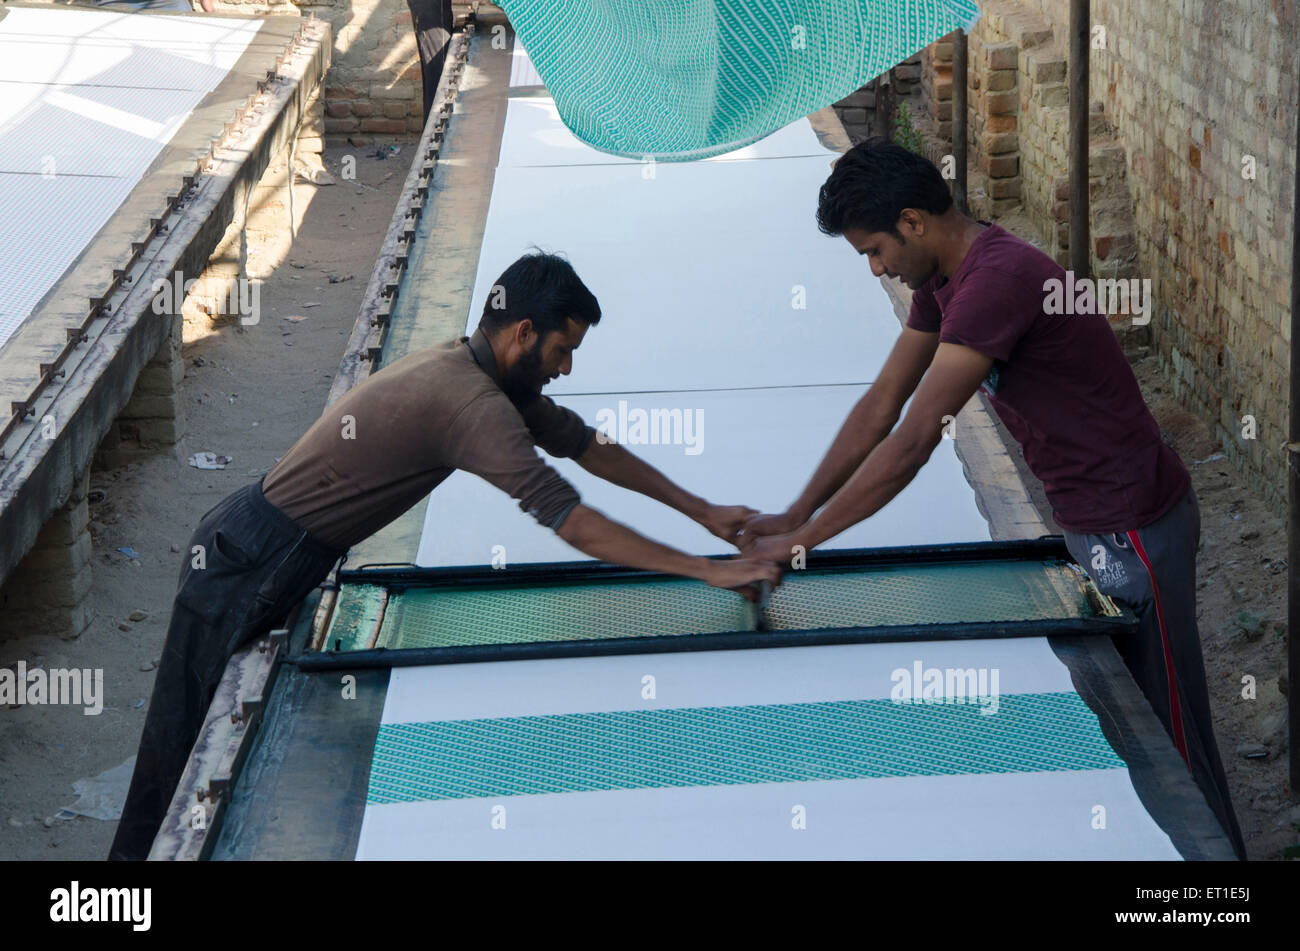 workers engaged in cloth printing work Bikaner Rajasthan India Asia Stock Photo